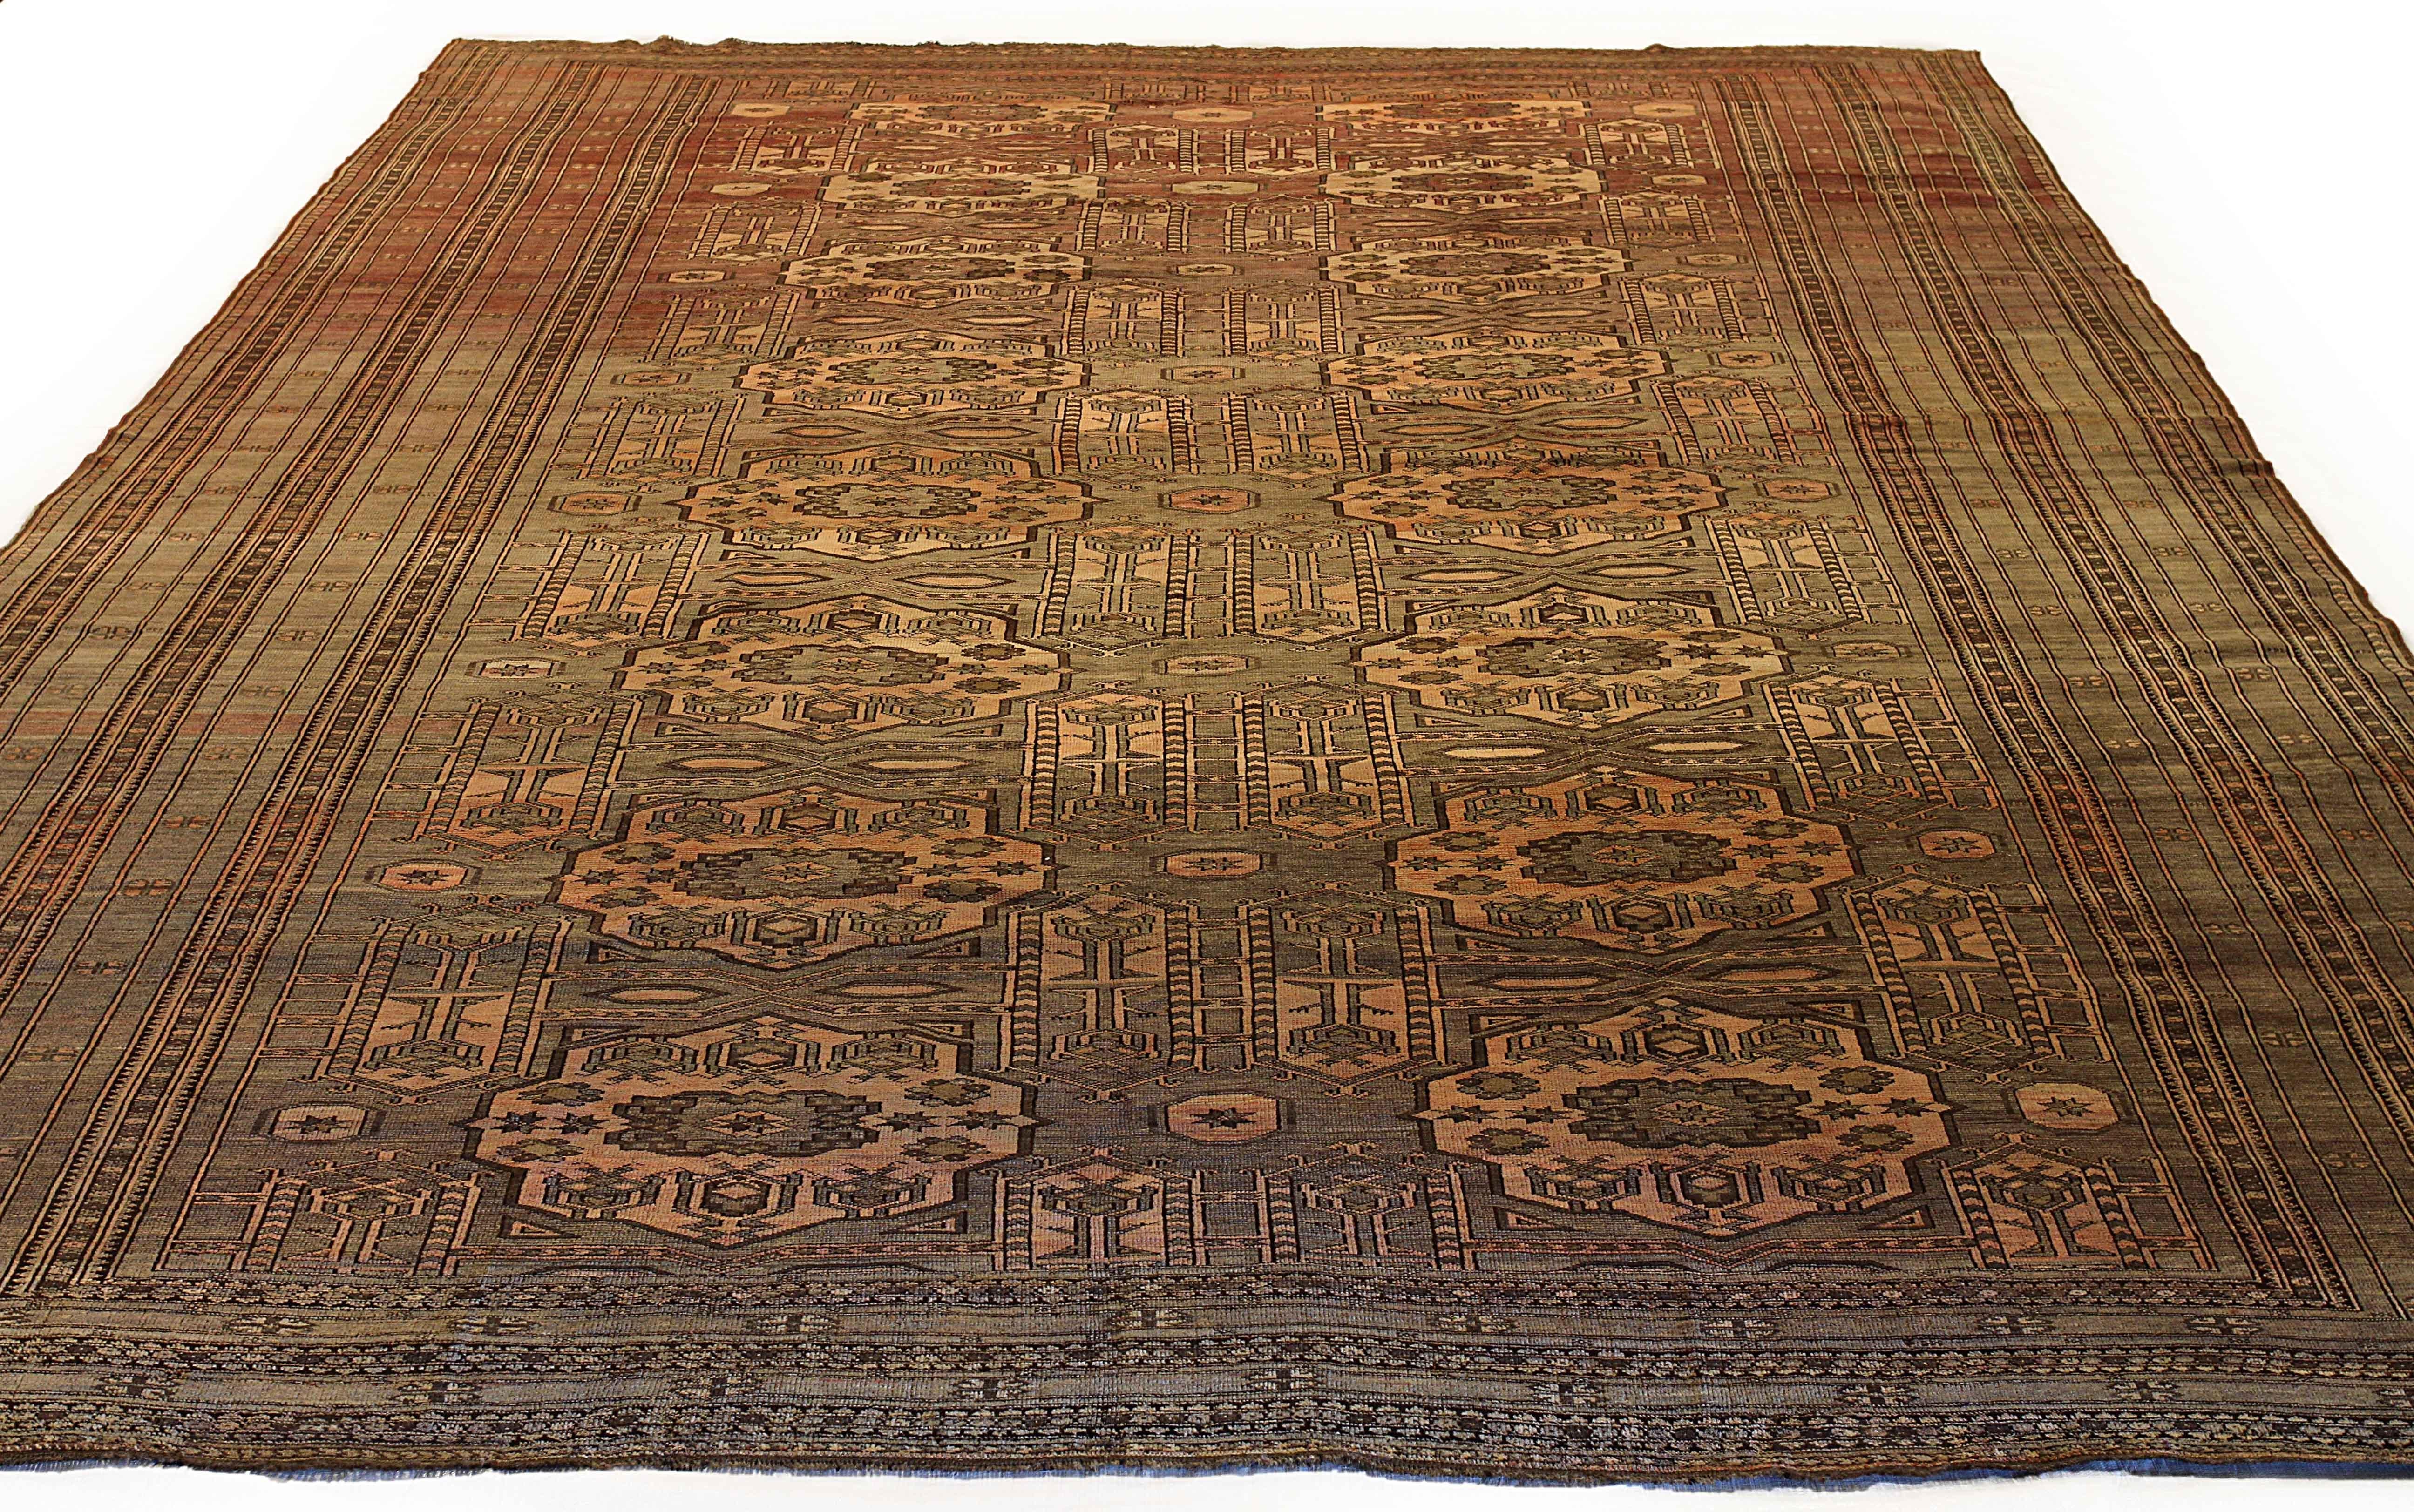 Afghan rugs, often known as Afghan carpets, are hand-woven rugs that are historically created in Afghanistan, though many are also weaved by Afghan refugees in Pakistan. Afghan rugs received the international prizes in 2008, 2013, and 2014, which